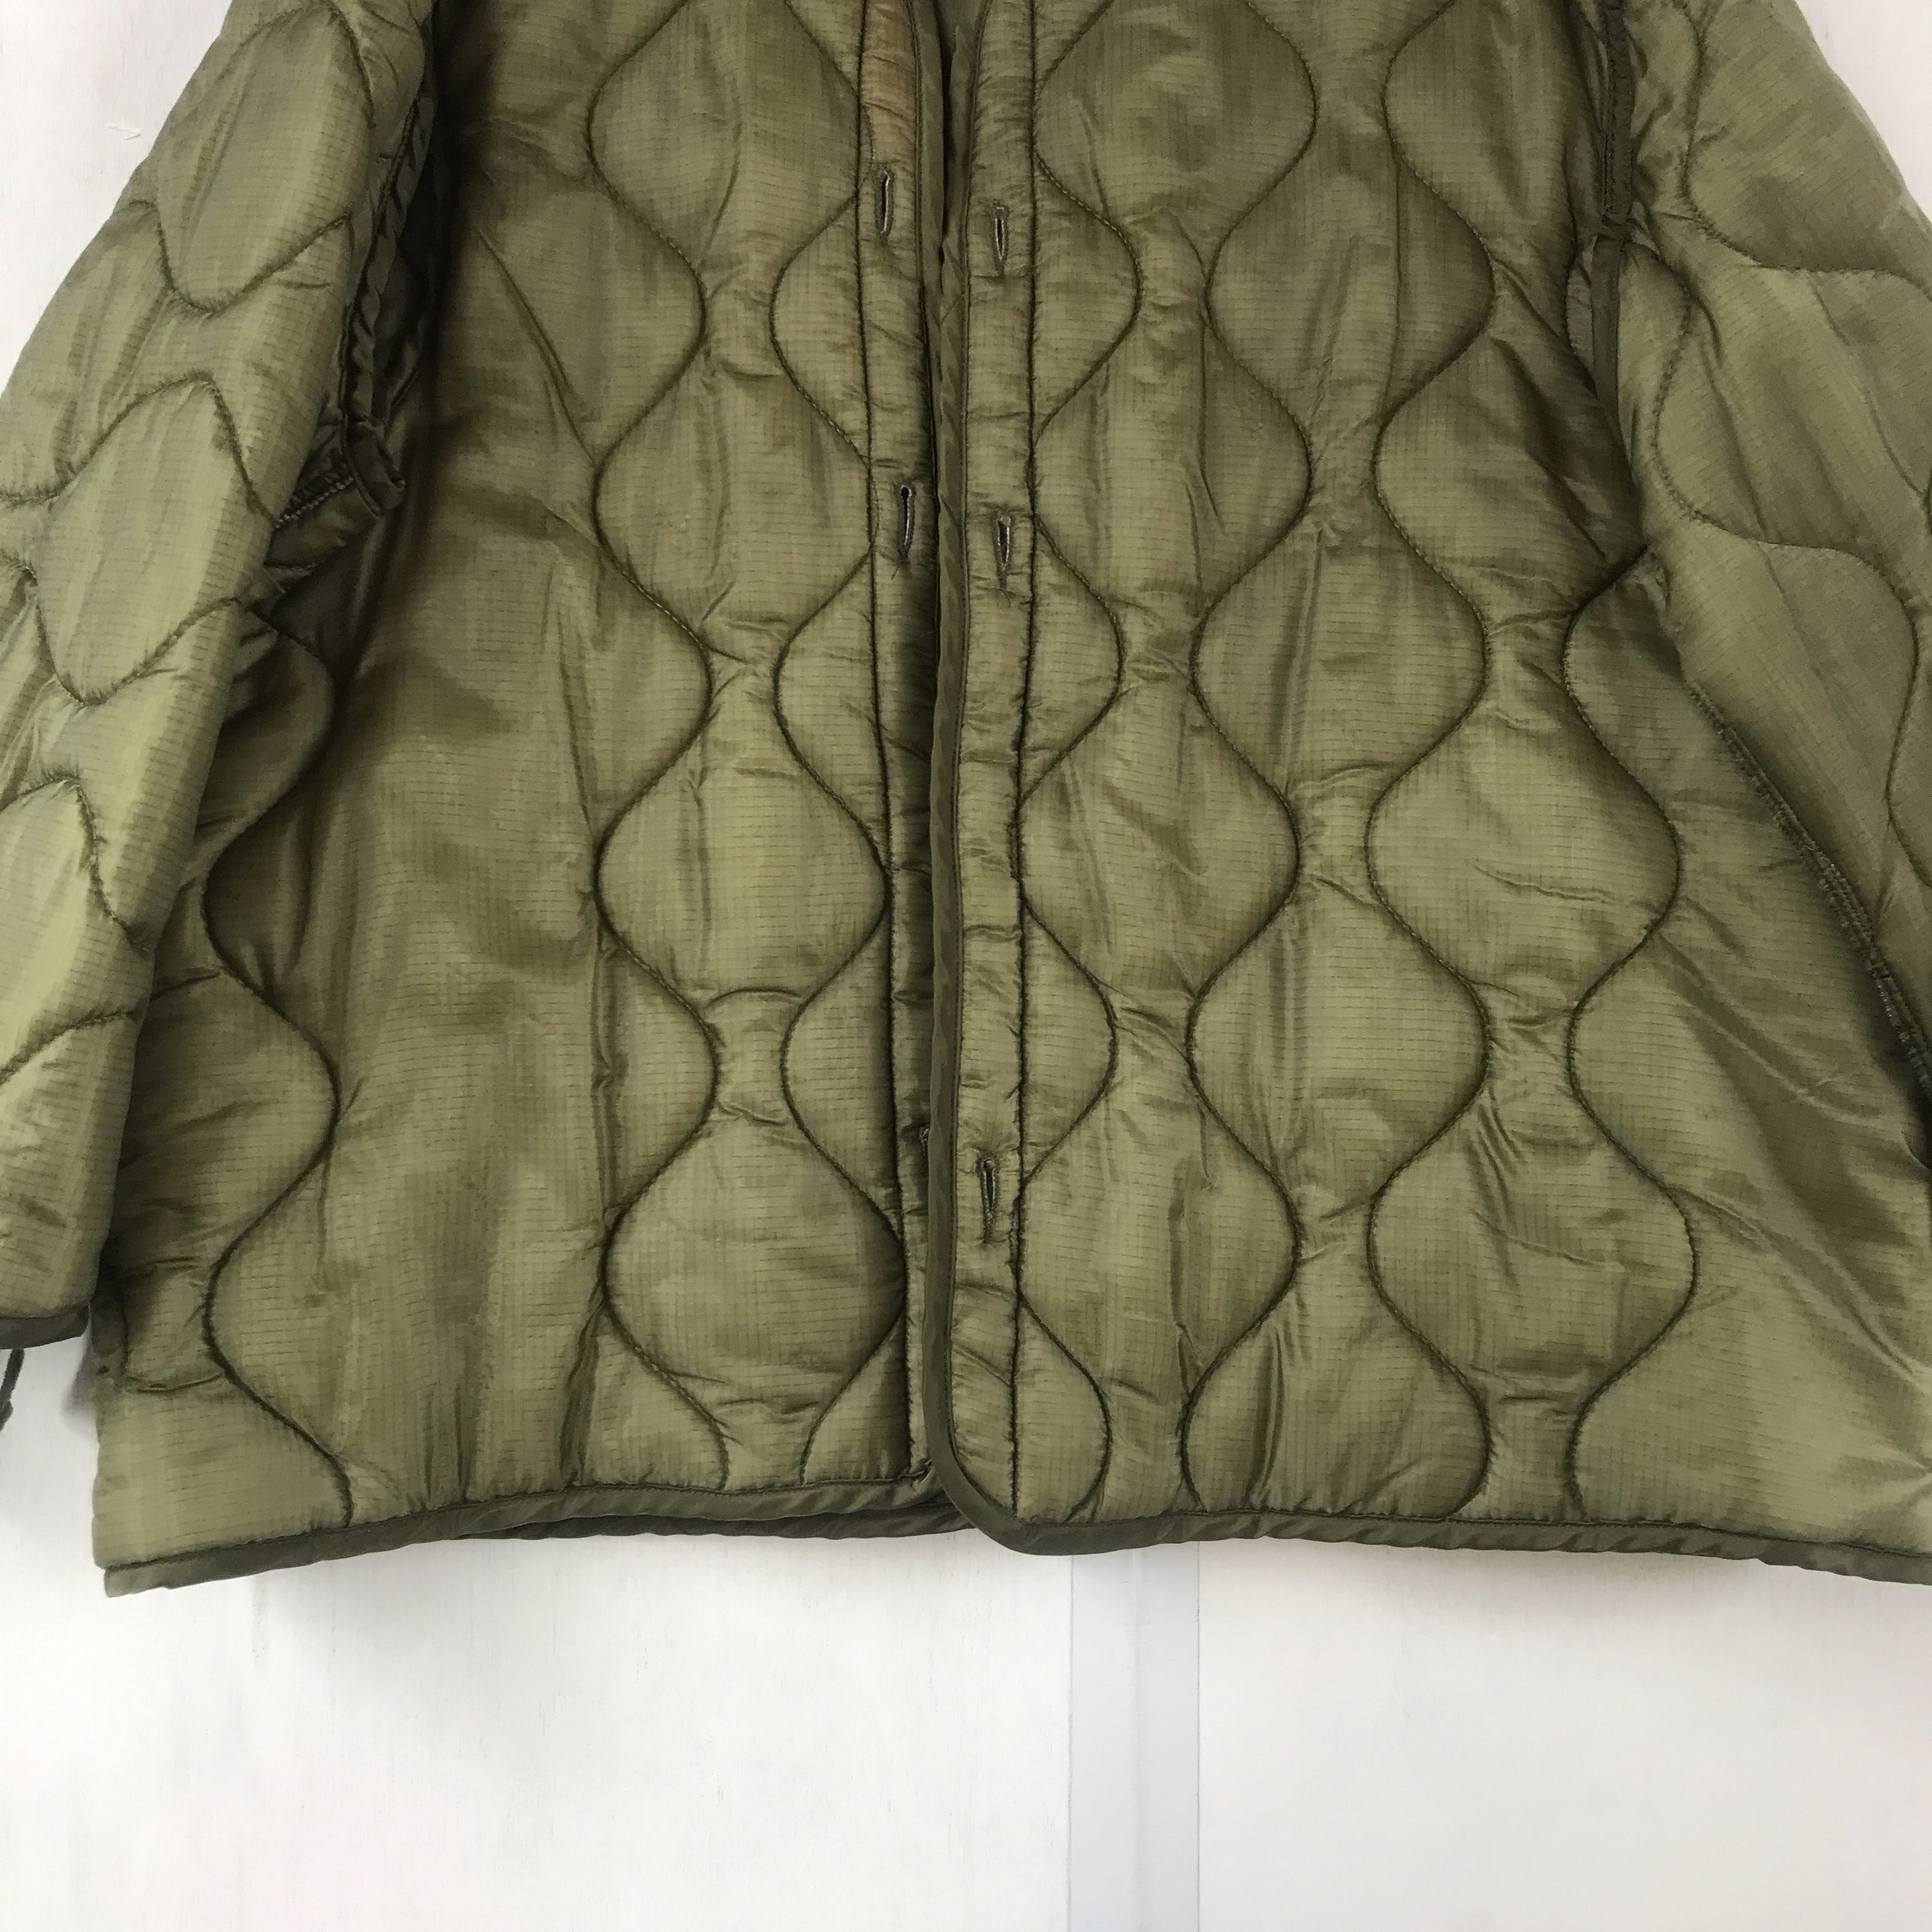 [ ONLY ONE ! ] 84’s LINER, COLD WEATHER COAT, MAN'S /U.S.MILITARY